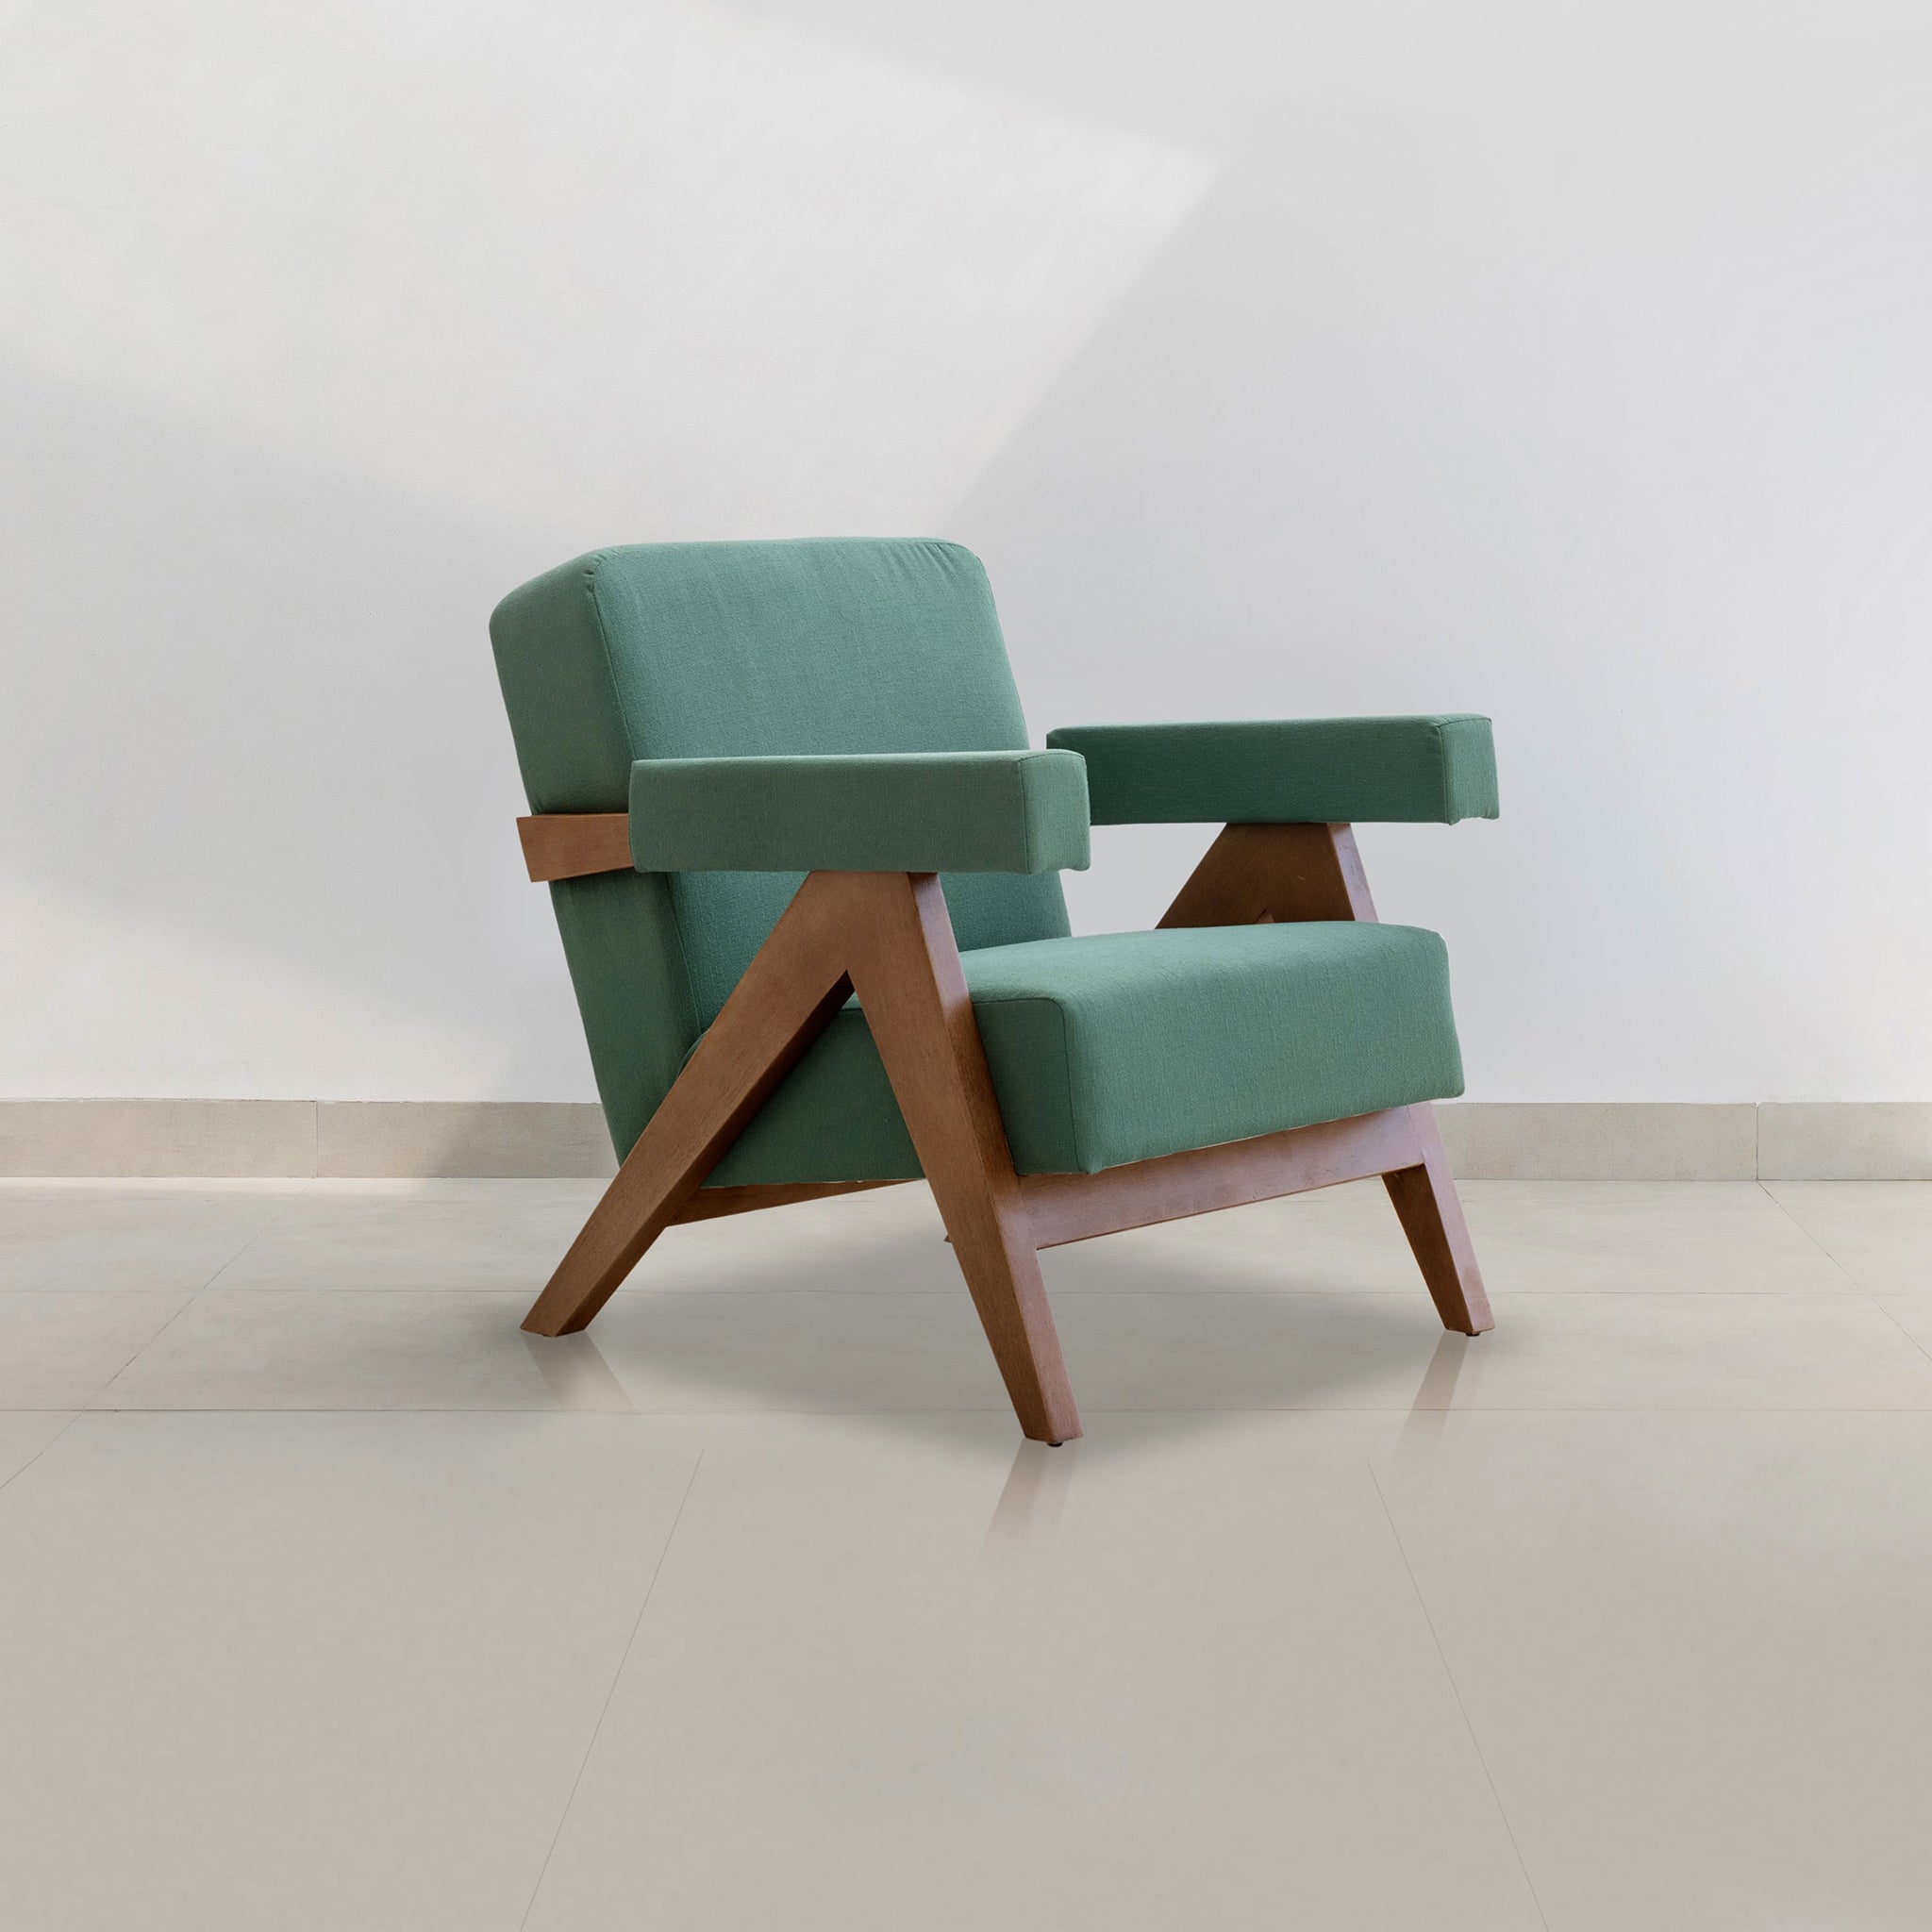 Teal and wood Pierre Accent Chair for a mid-century modern look